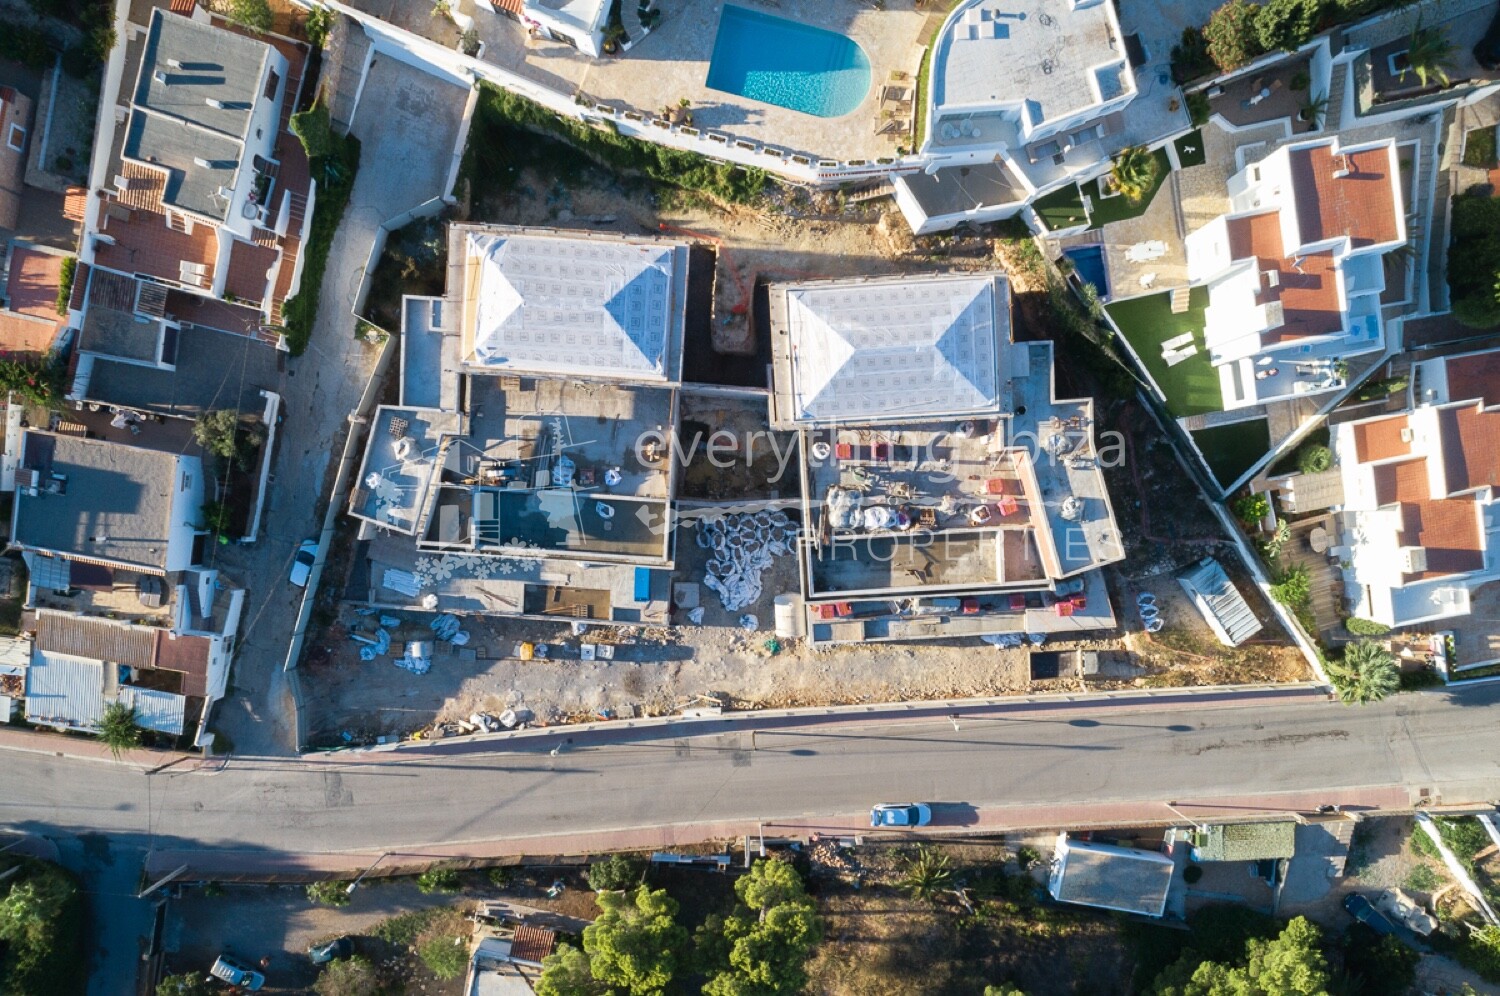 New Build Villas of the Finest Quality with Super Views, ref. 1623, for sale in Ibiza by everything ibiza Properties